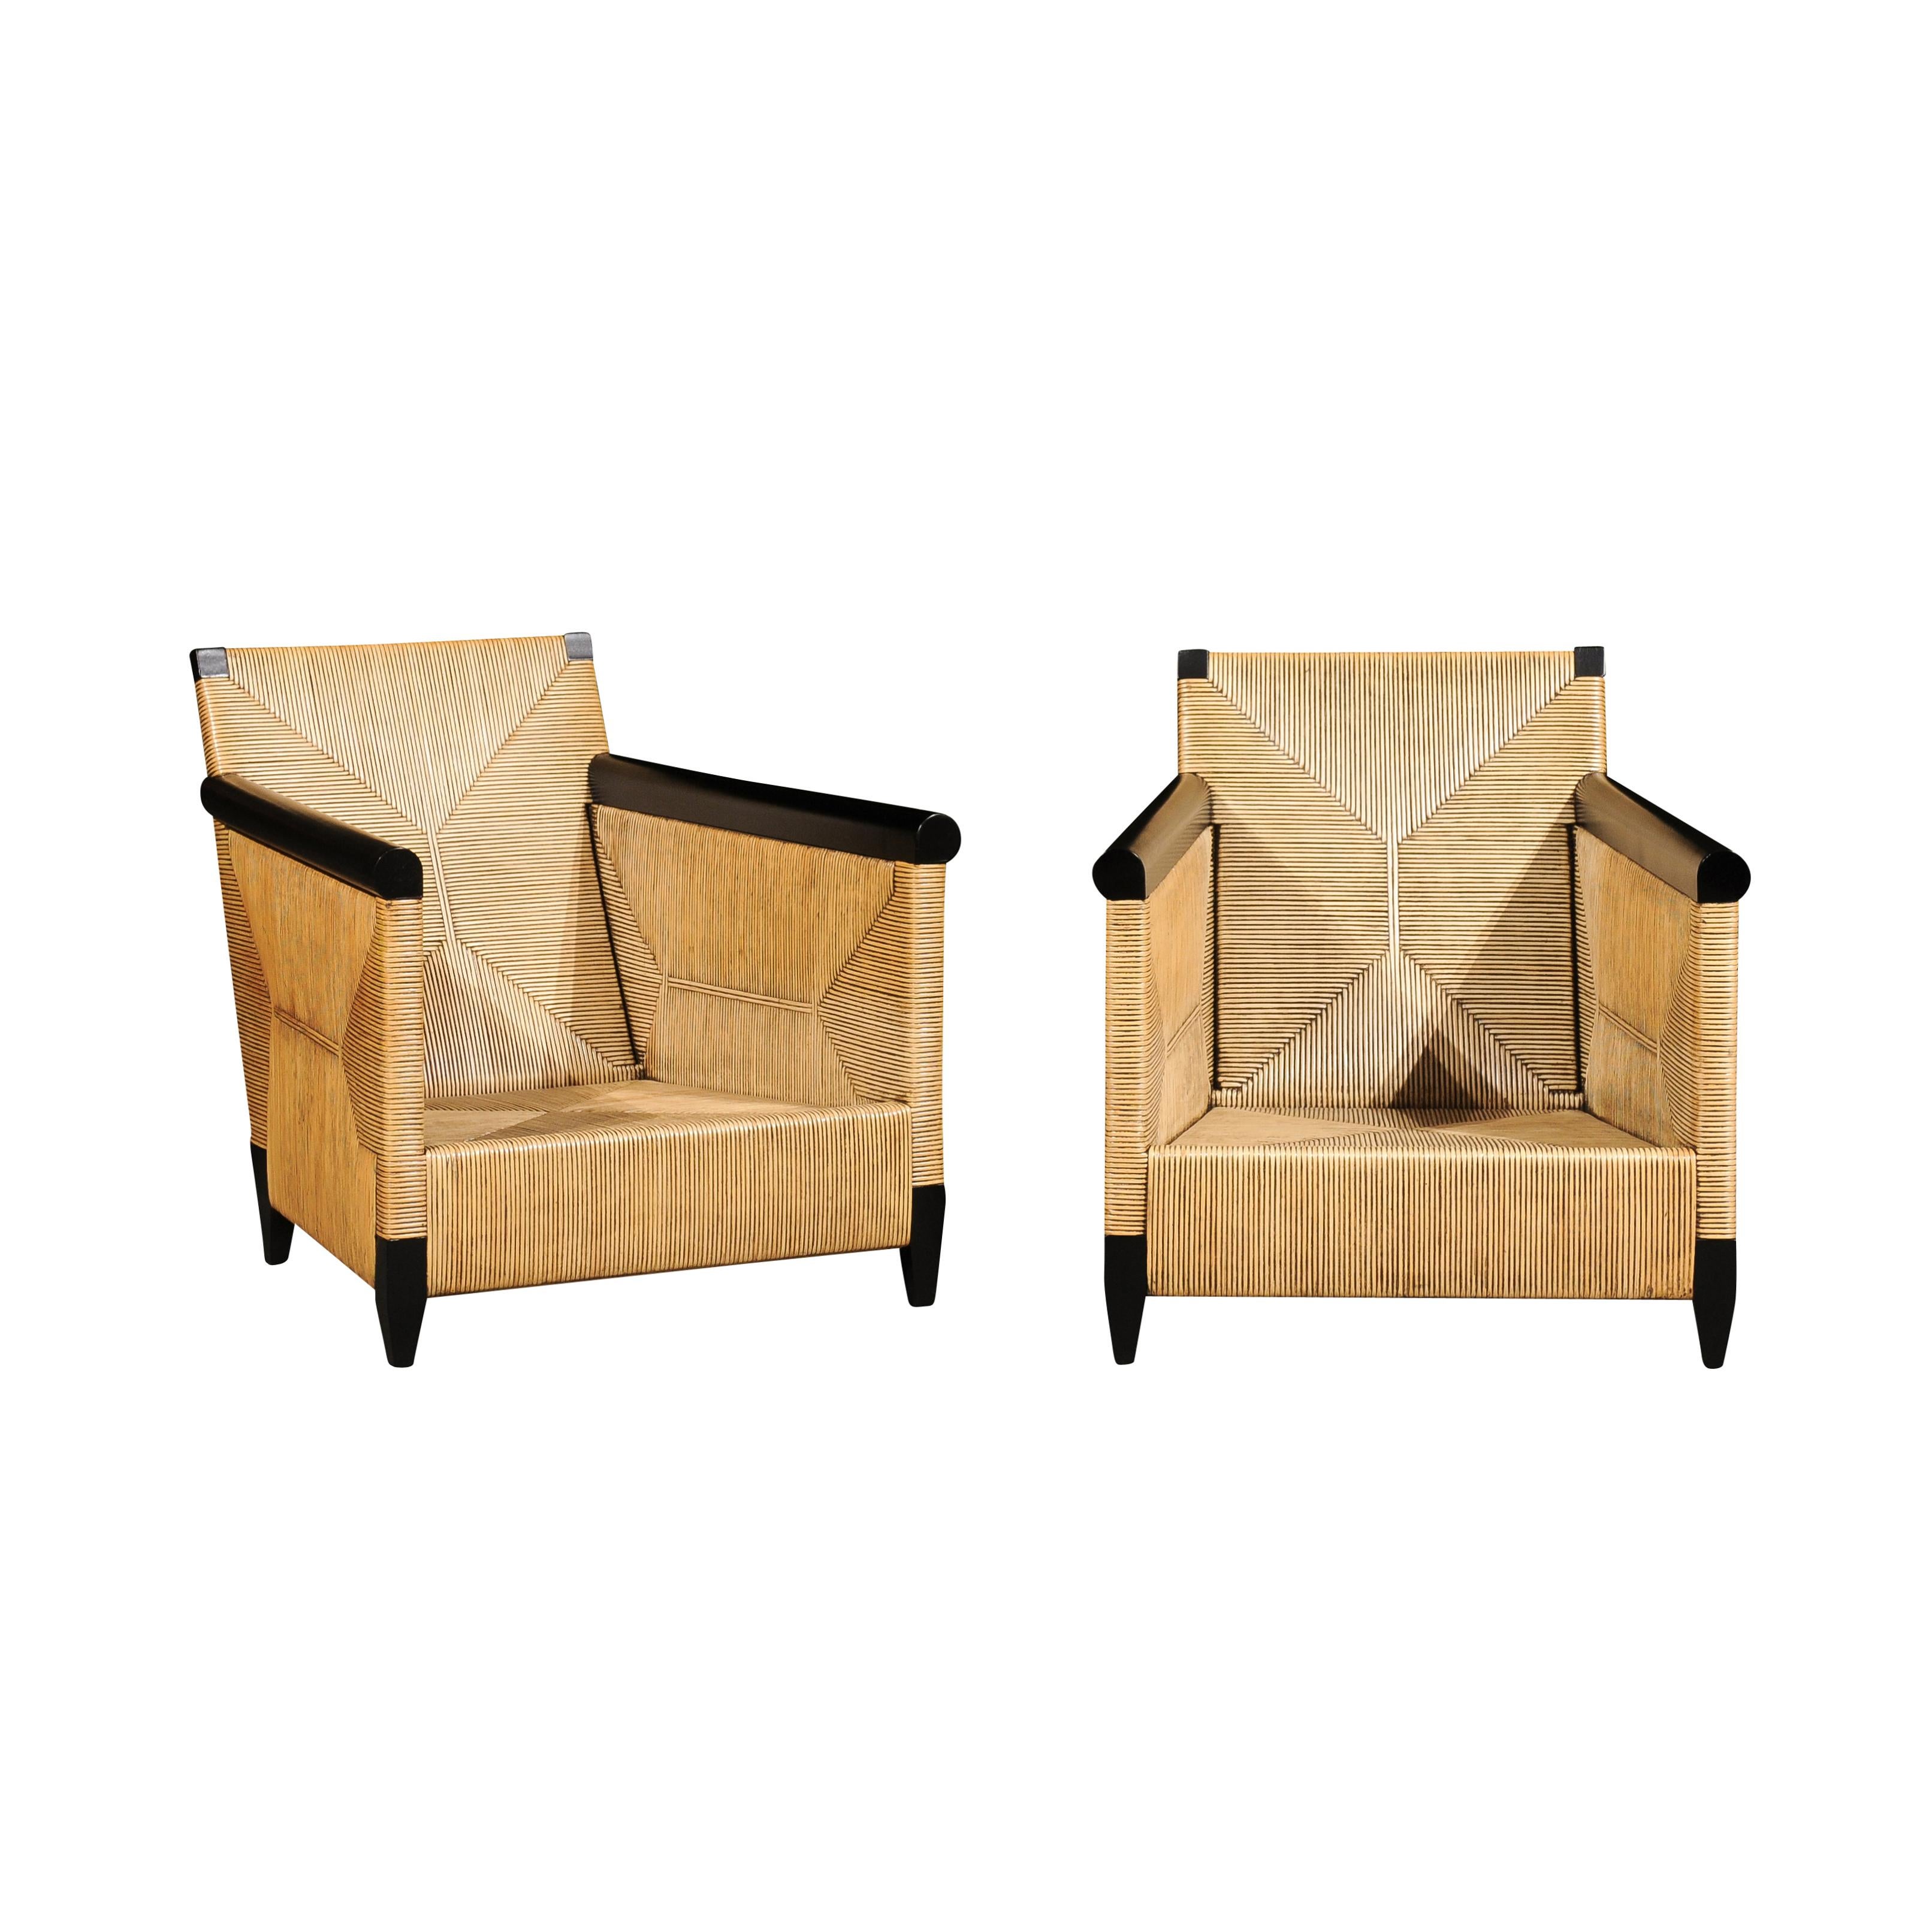 Breathtaking Pair of Black Lacquer Rush Cane Loungers by John Hutton for Donghia For Sale 14